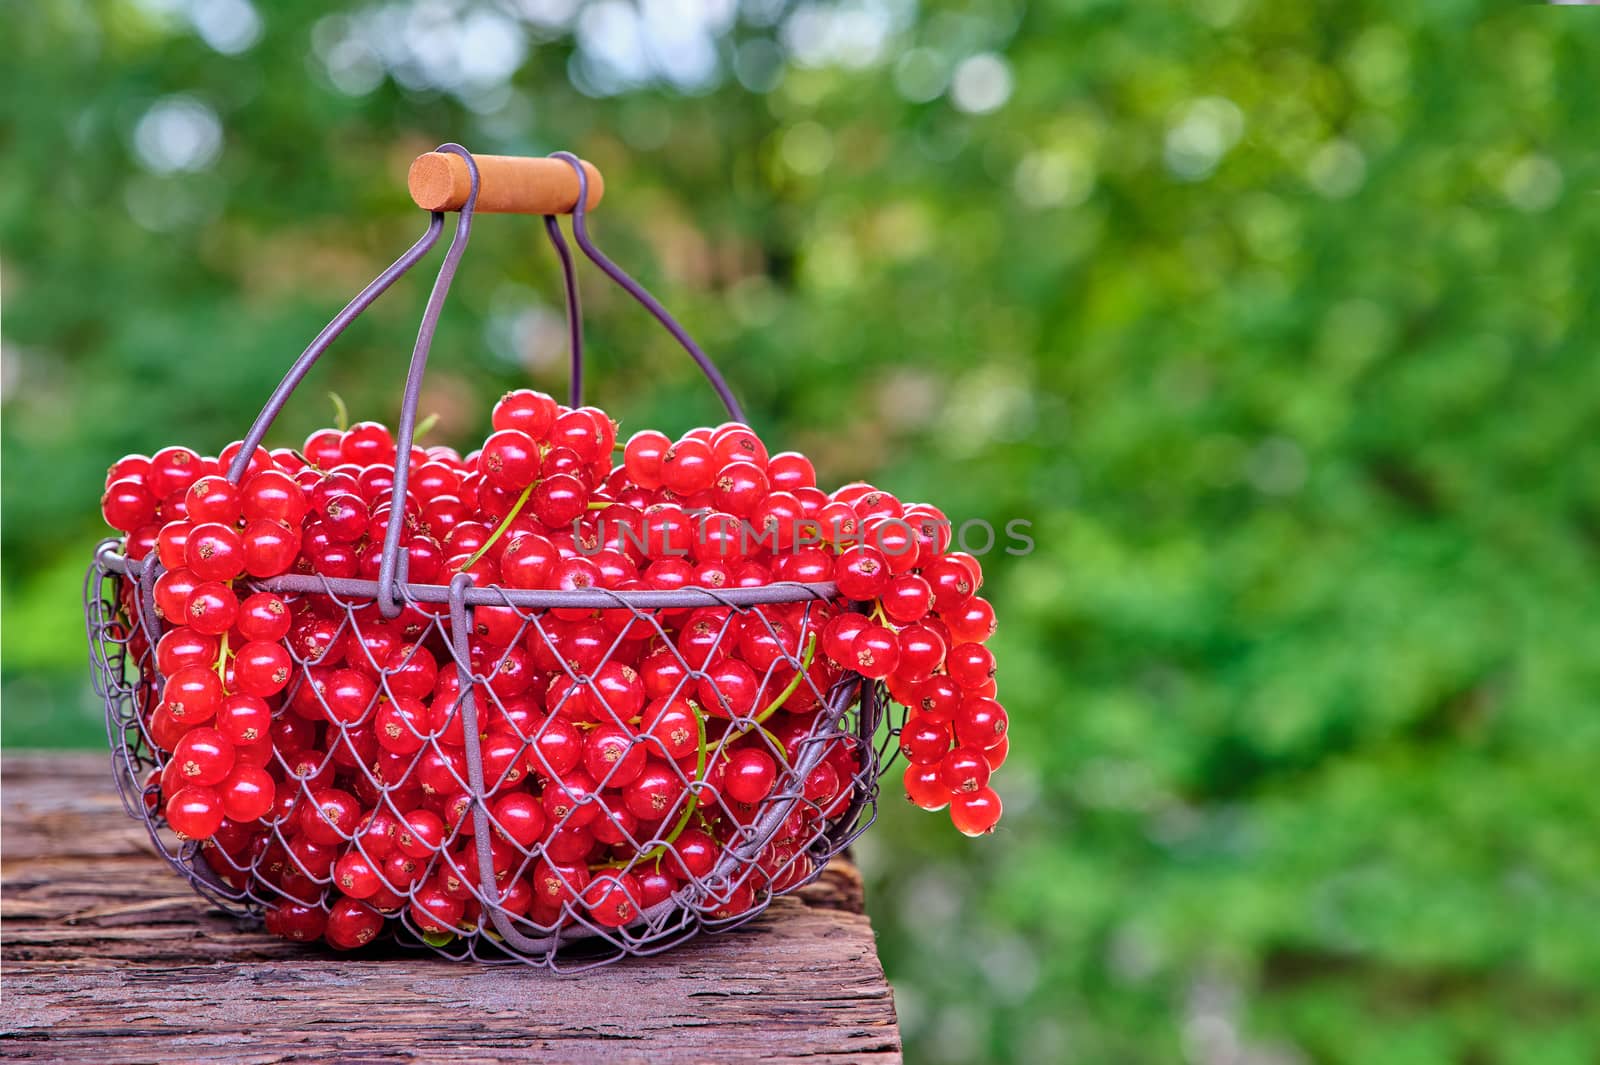 Red currant in a metal basket, backside background of green leaves.